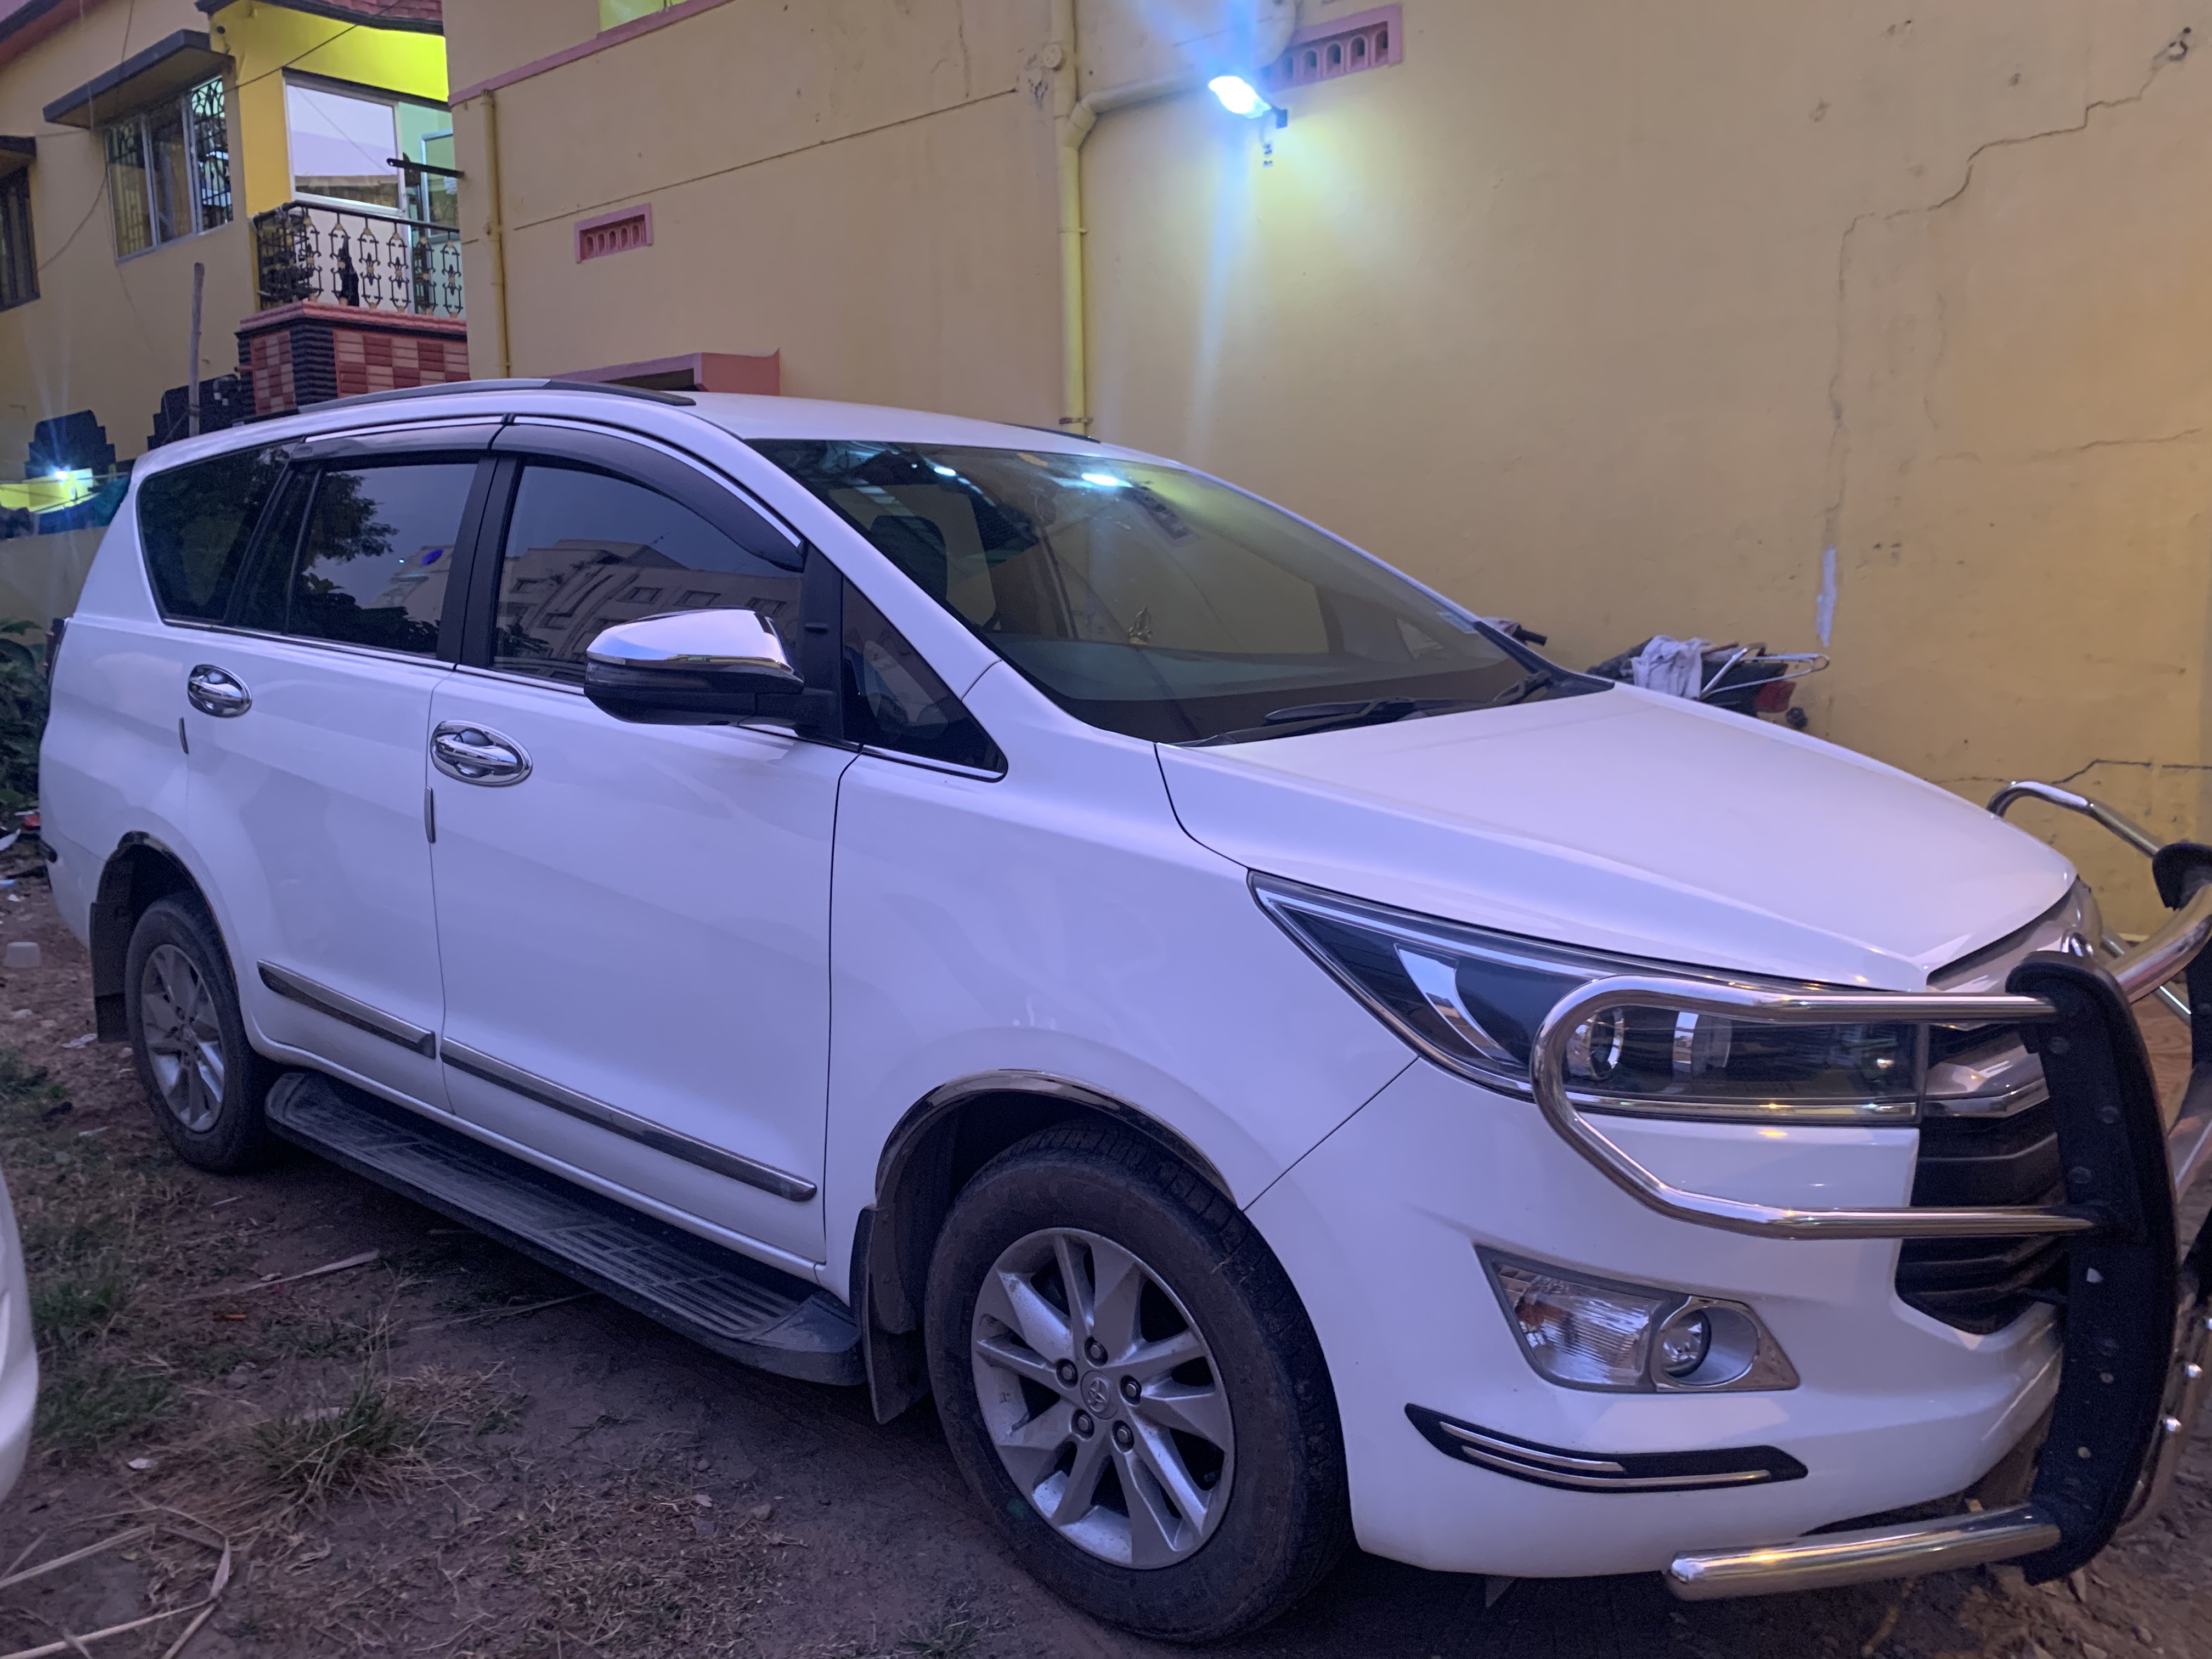 6035-for-sale-Toyota-Innova-Crysta-Diesel-First-Owner-2020-PY-registered-rs-2250000